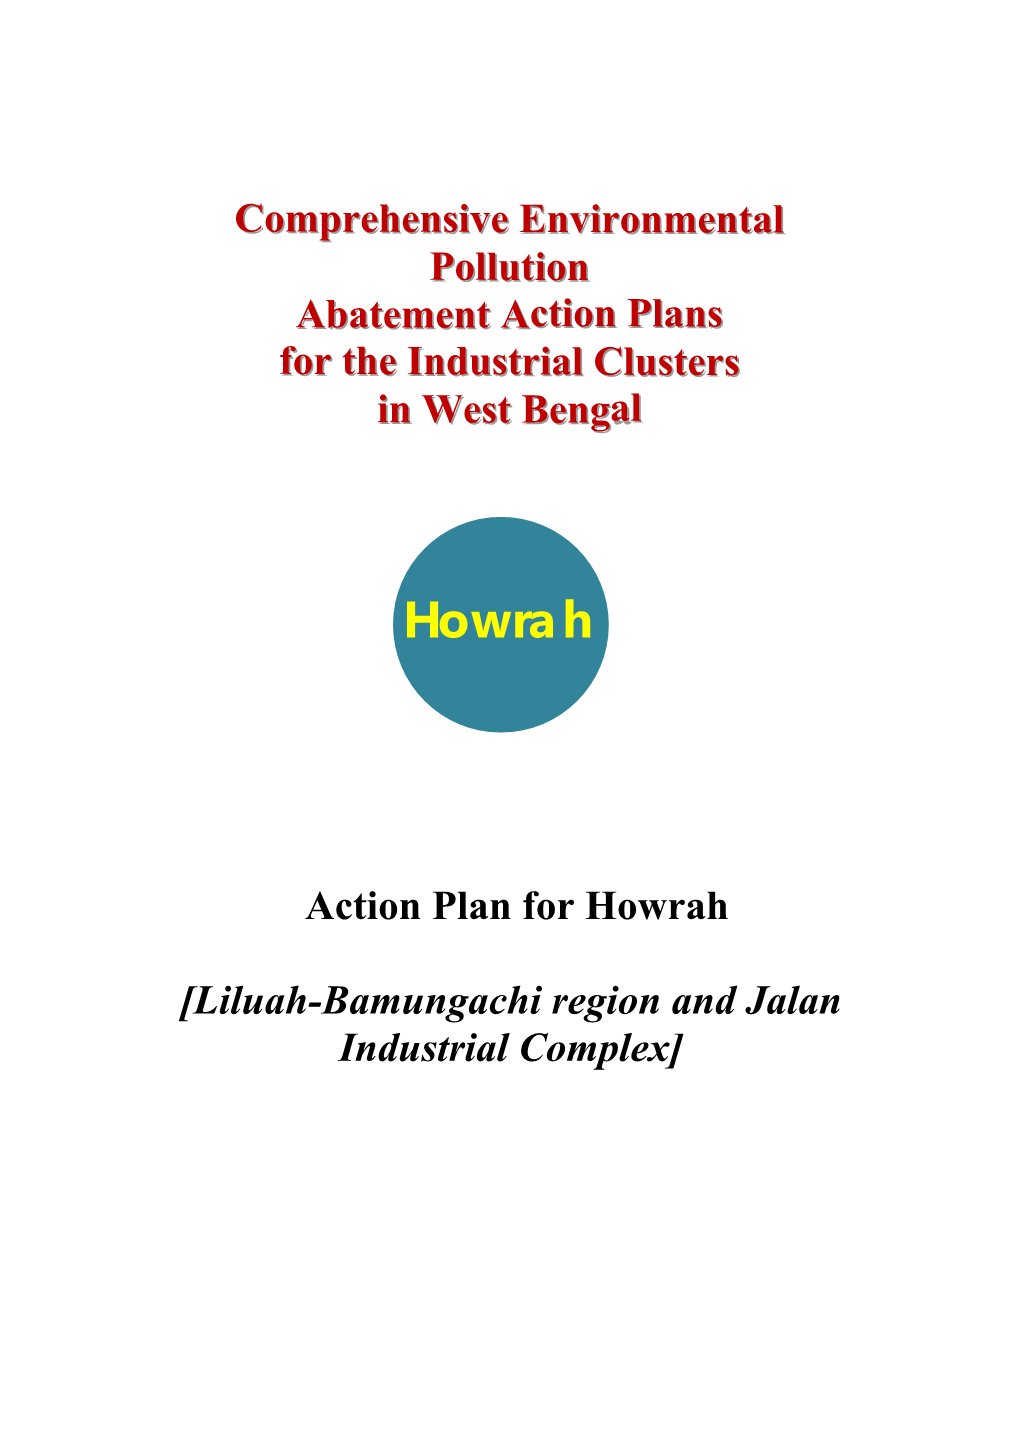 Liluah-Bamungachi Region and Jalan Industrial Complex] FRAMEWORK of MODEL ACTION PLAN for CRITICALLY POLLUTED INDUSTRIAL AREAS/ CLUSTERS